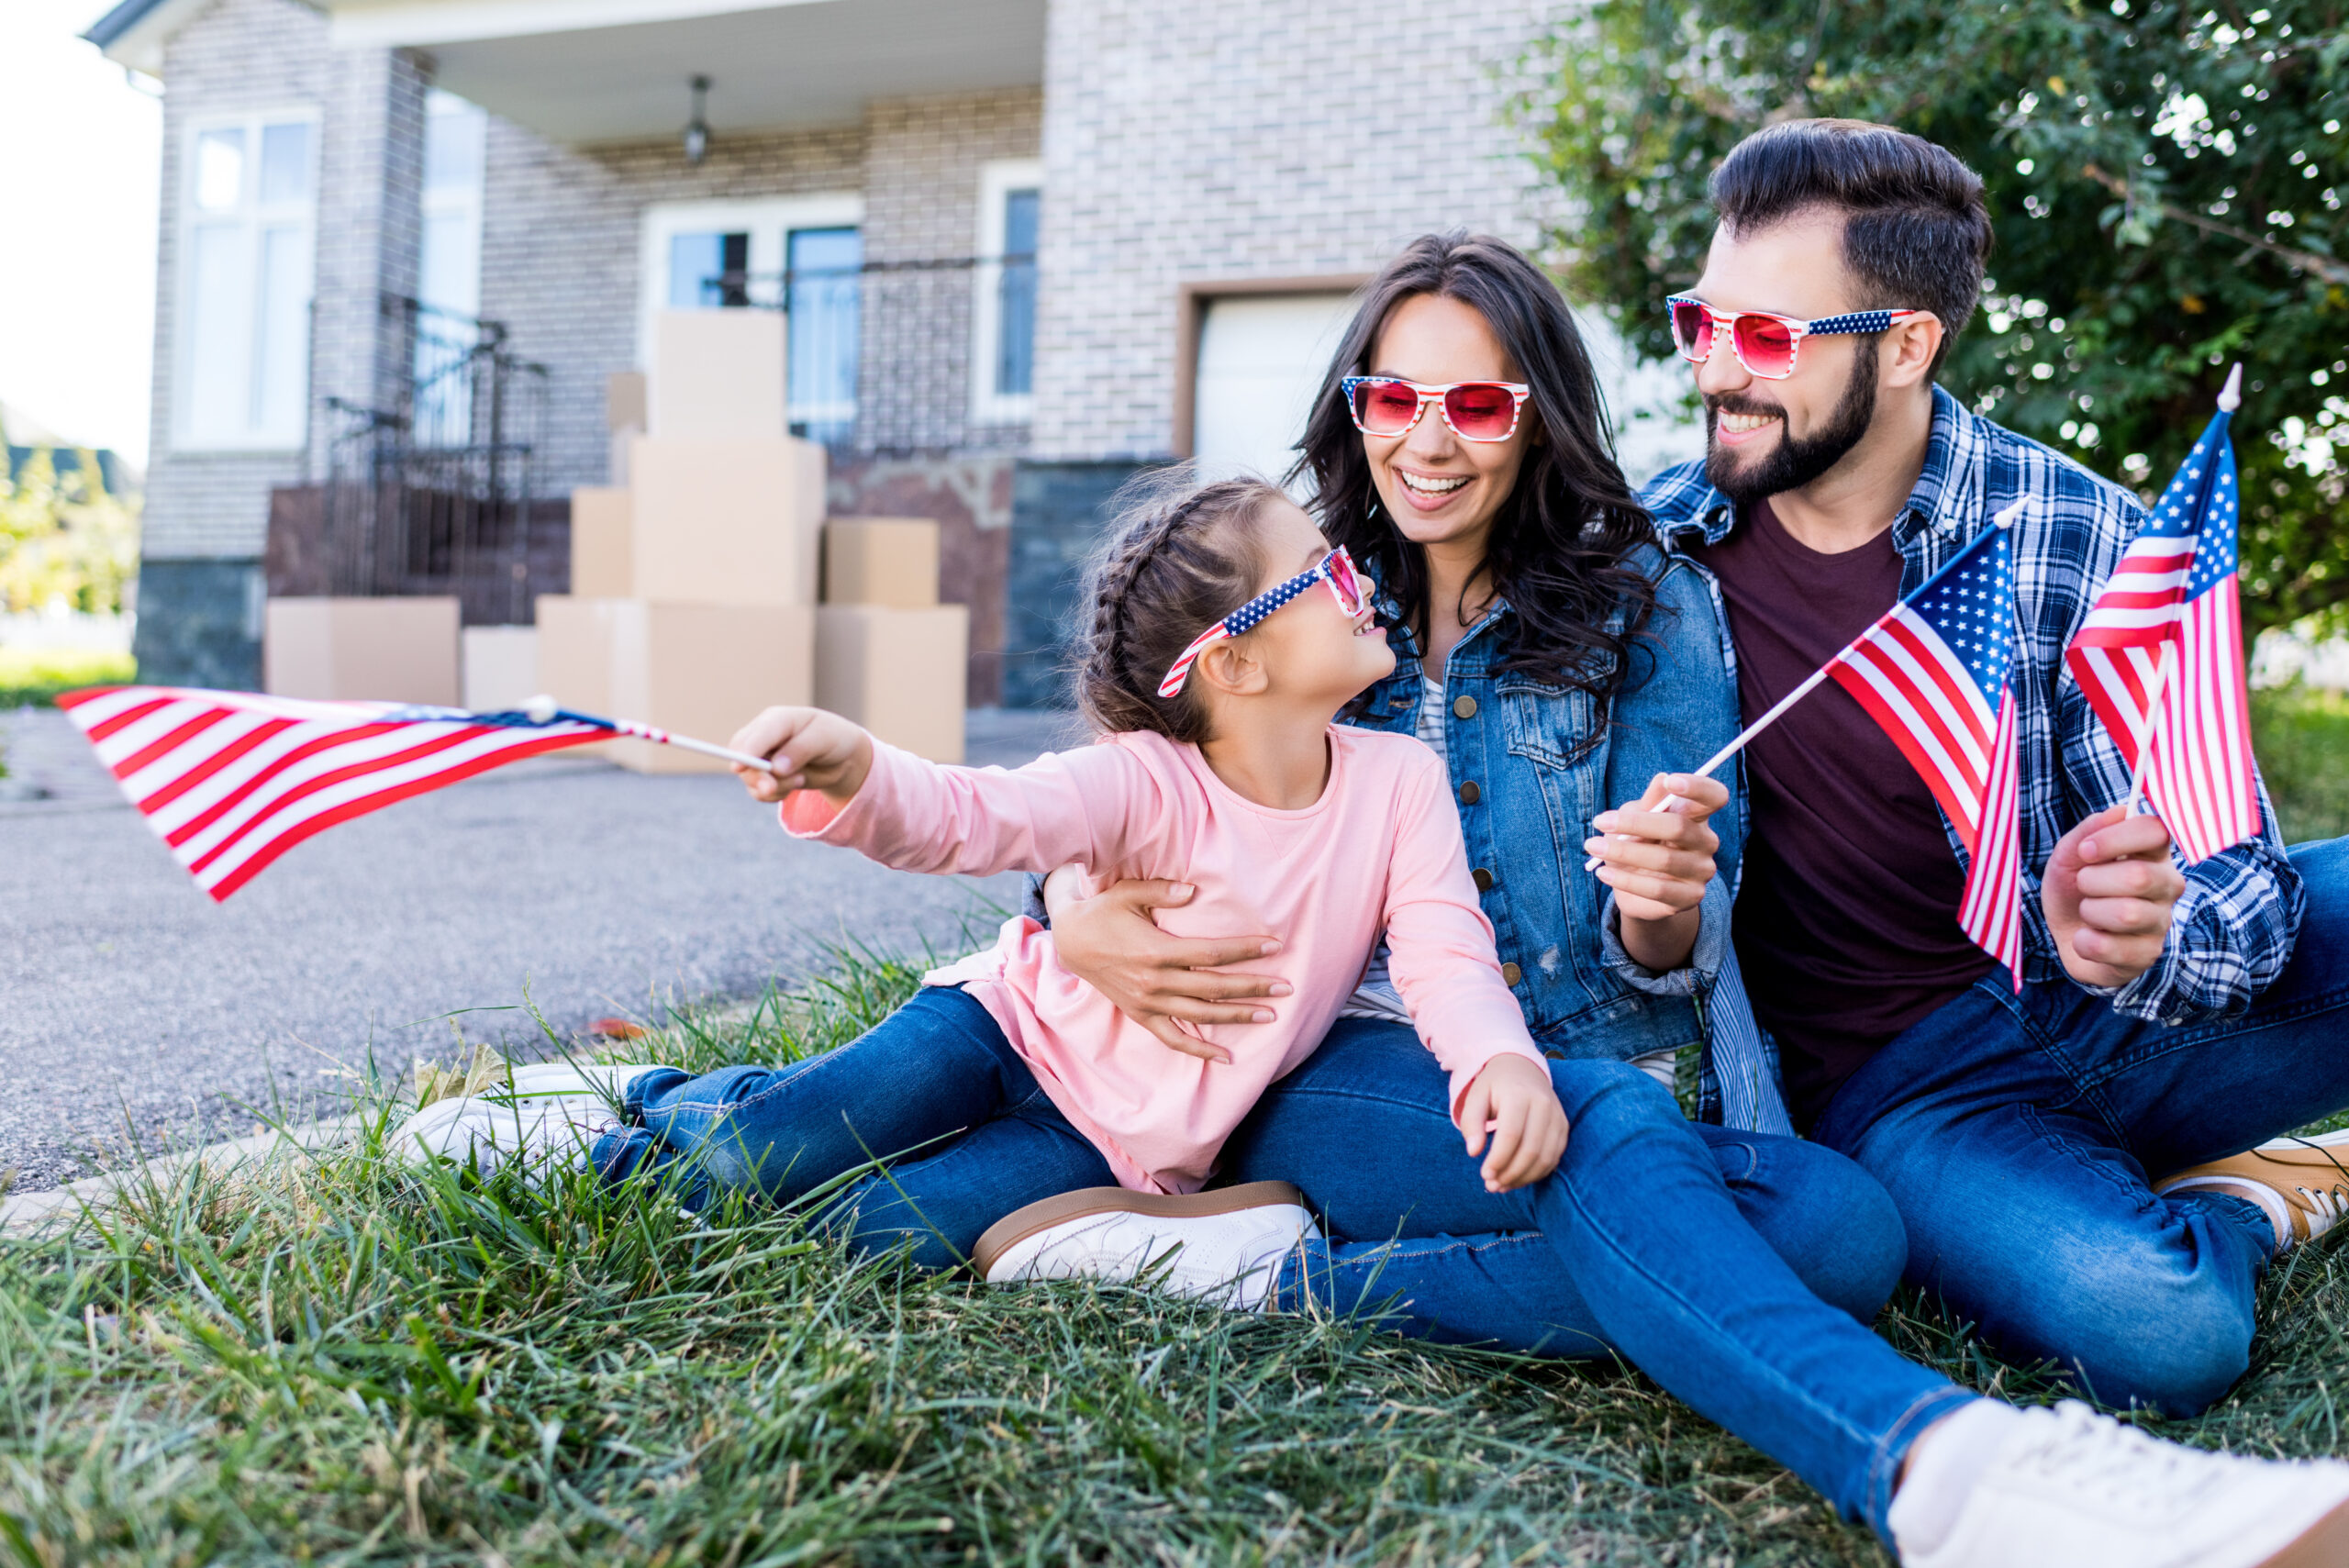 Family,With,American,Flags,And,Sunglasses,Sitting,In,Garden,Of